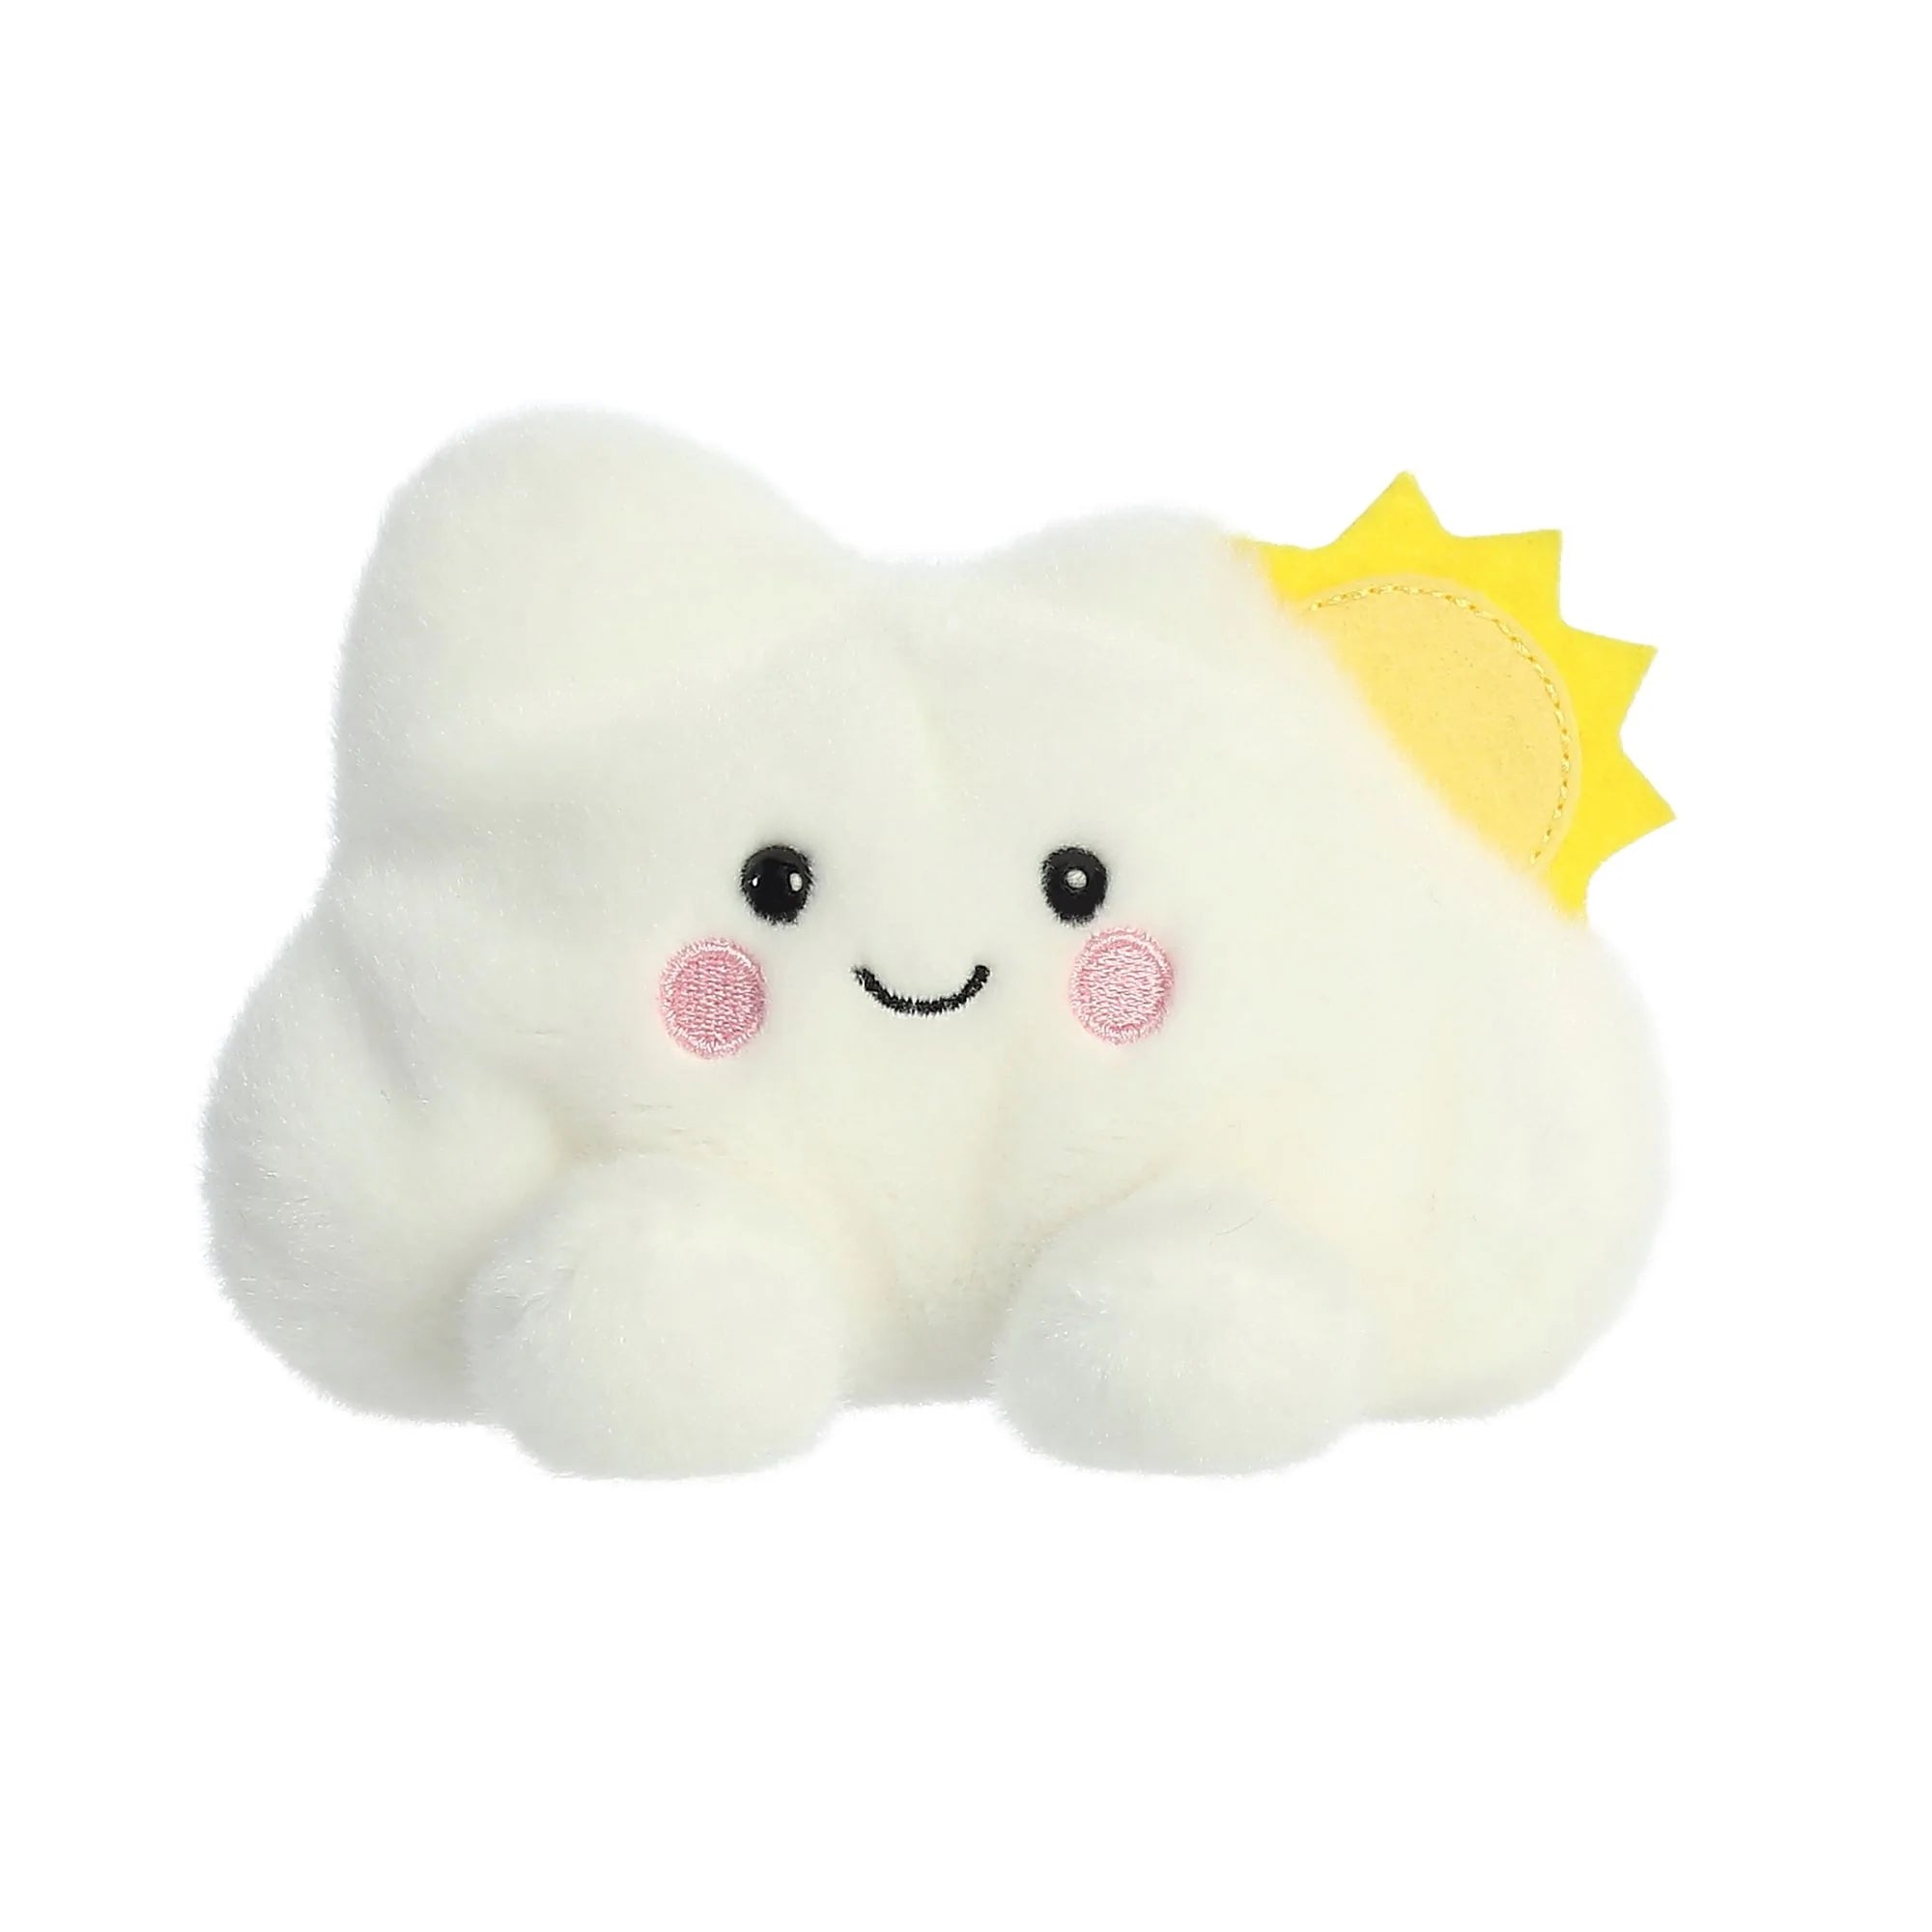 A white soft toy shaped like a cloud with a very friendly smiling face and a cute sunshine.